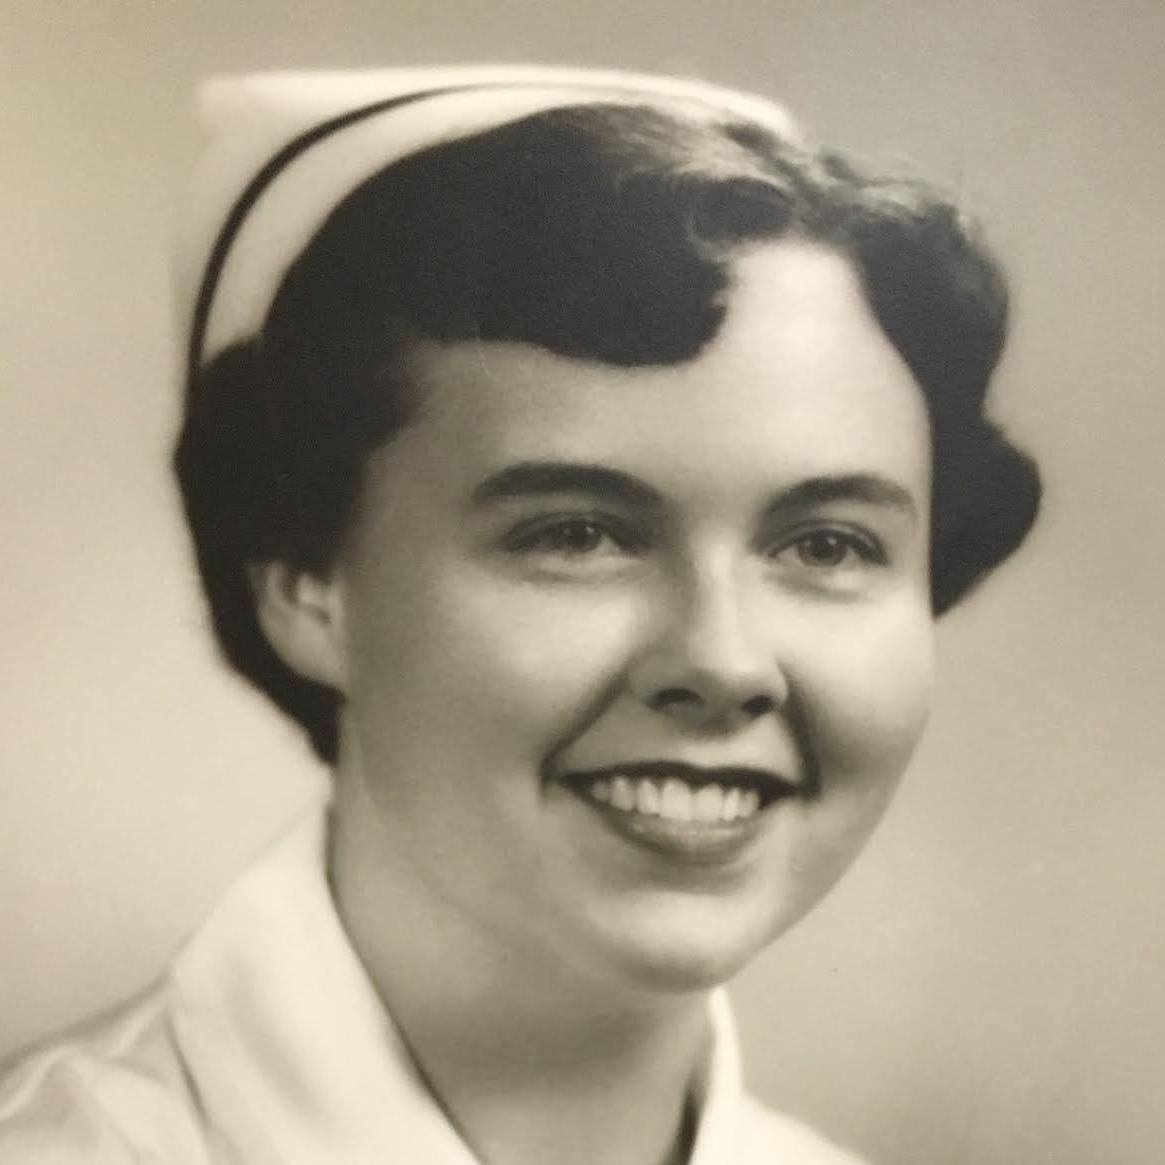 Mother daughter: Image of a young woman in a nurse's uniform and cap.